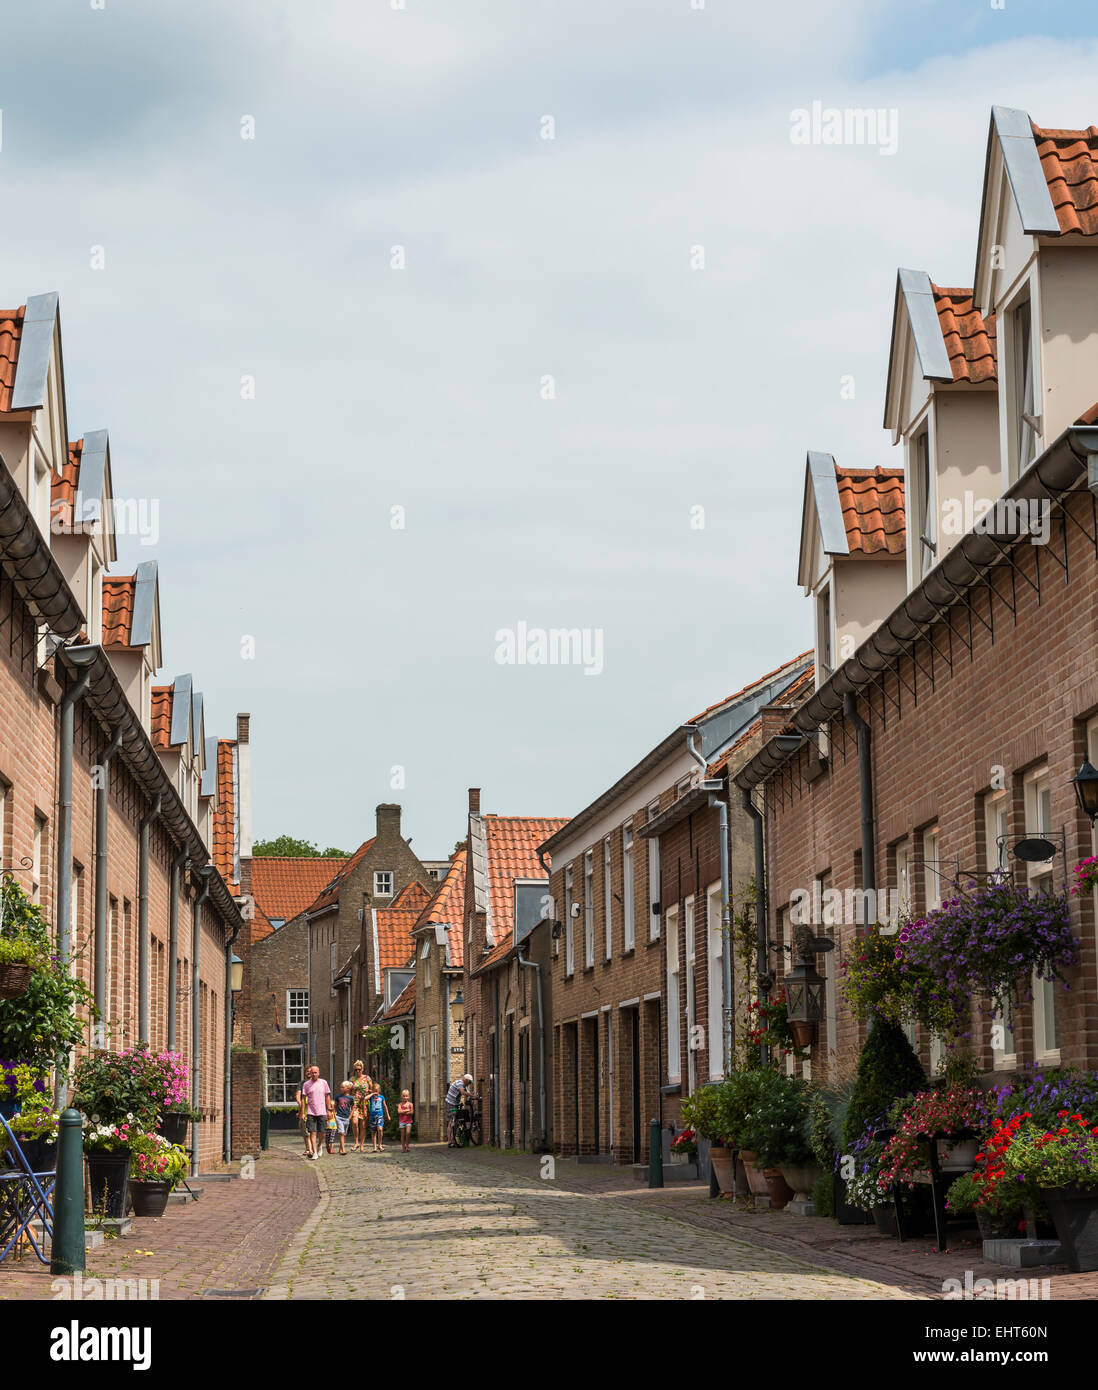 Street with tourists, houses and flowers in Heusden. Stock Photo